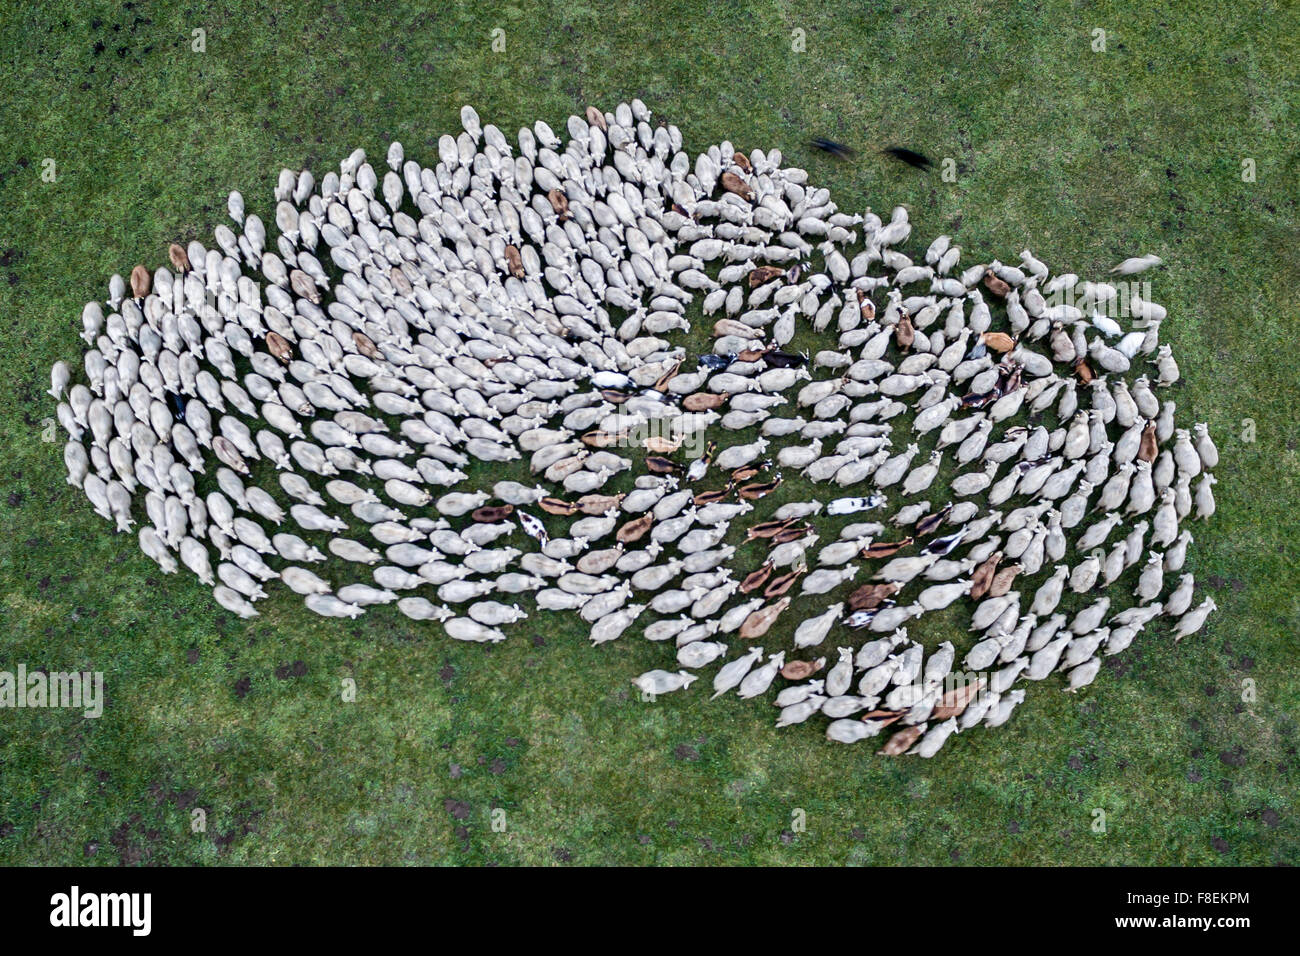 Weng, Germany. 08th Dec, 2015. Sheep graze on a field near Weng, Germany, 08 December 2015. Photo taken with a drone. Photo: ARMIN WEIGEL/dpa/Alamy Live News Stock Photo